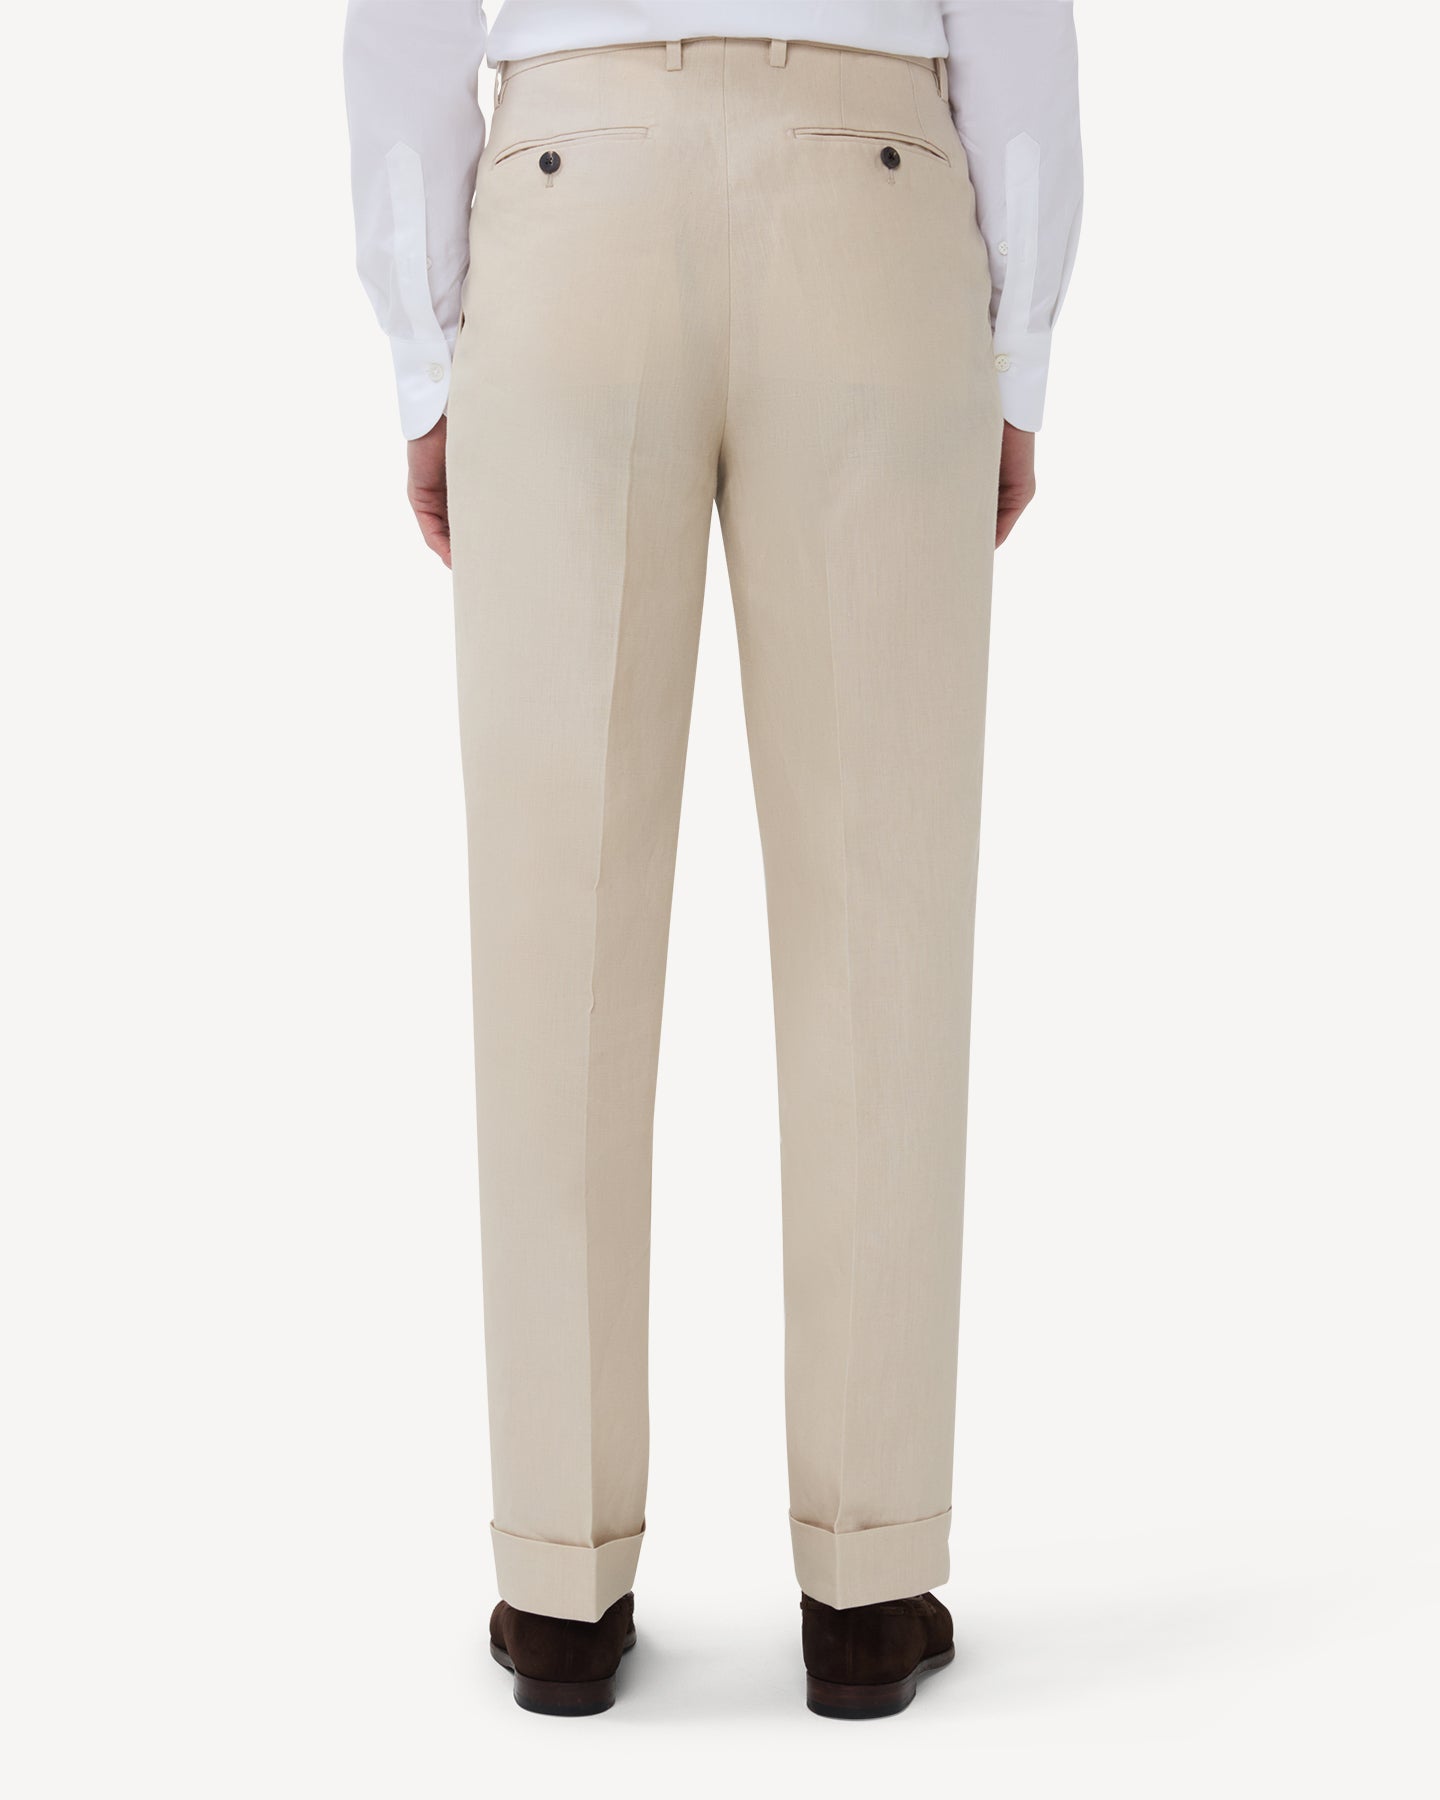 The back of stone linen trousers with double pleats and belt loops